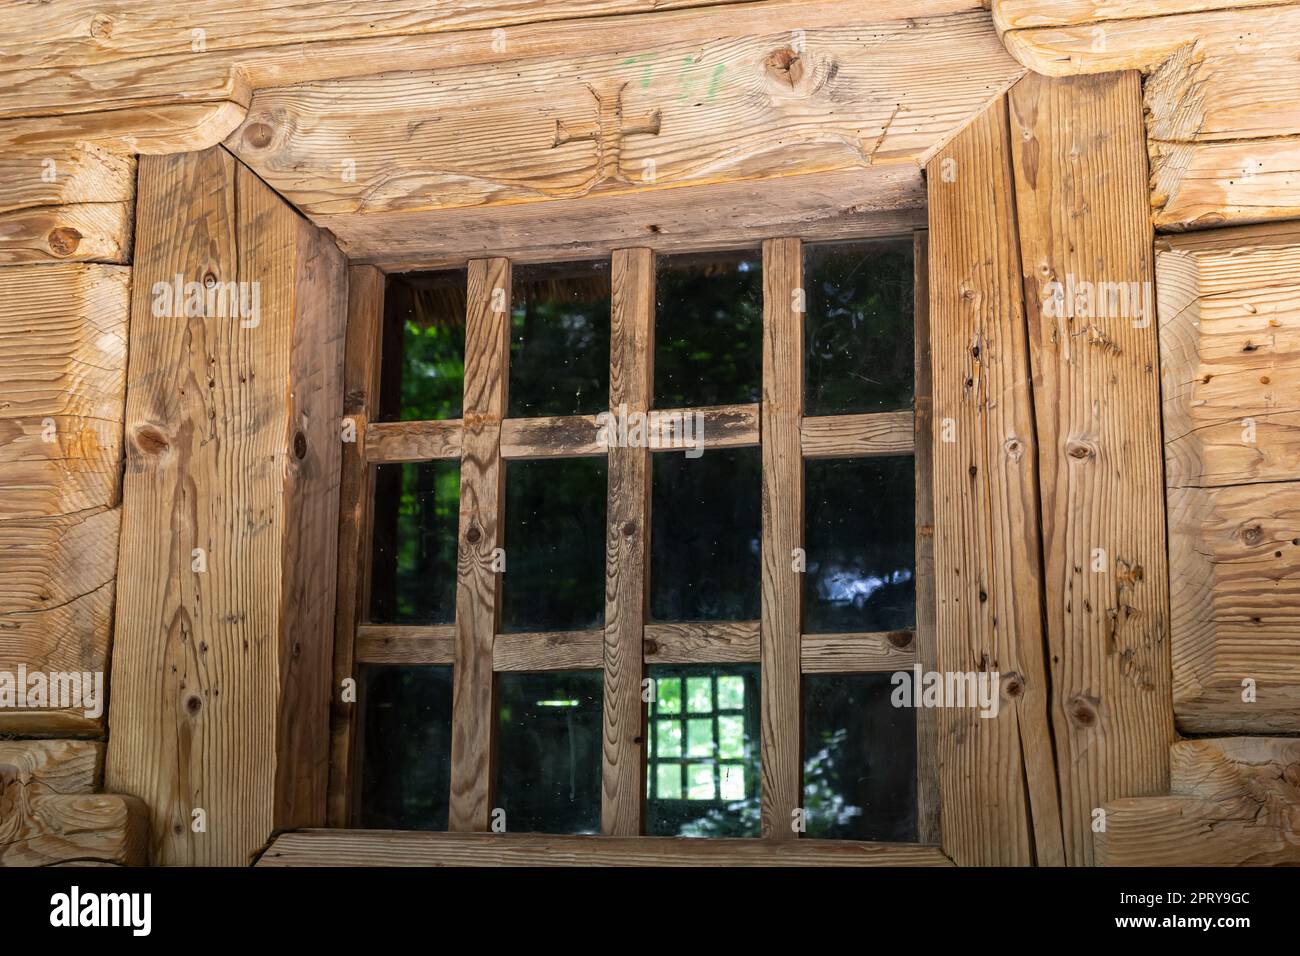 Window in a wooden house. wooden house with window frame. Old wooden house in the village, Wood board background, texture. Window with glass and frame Stock Photo